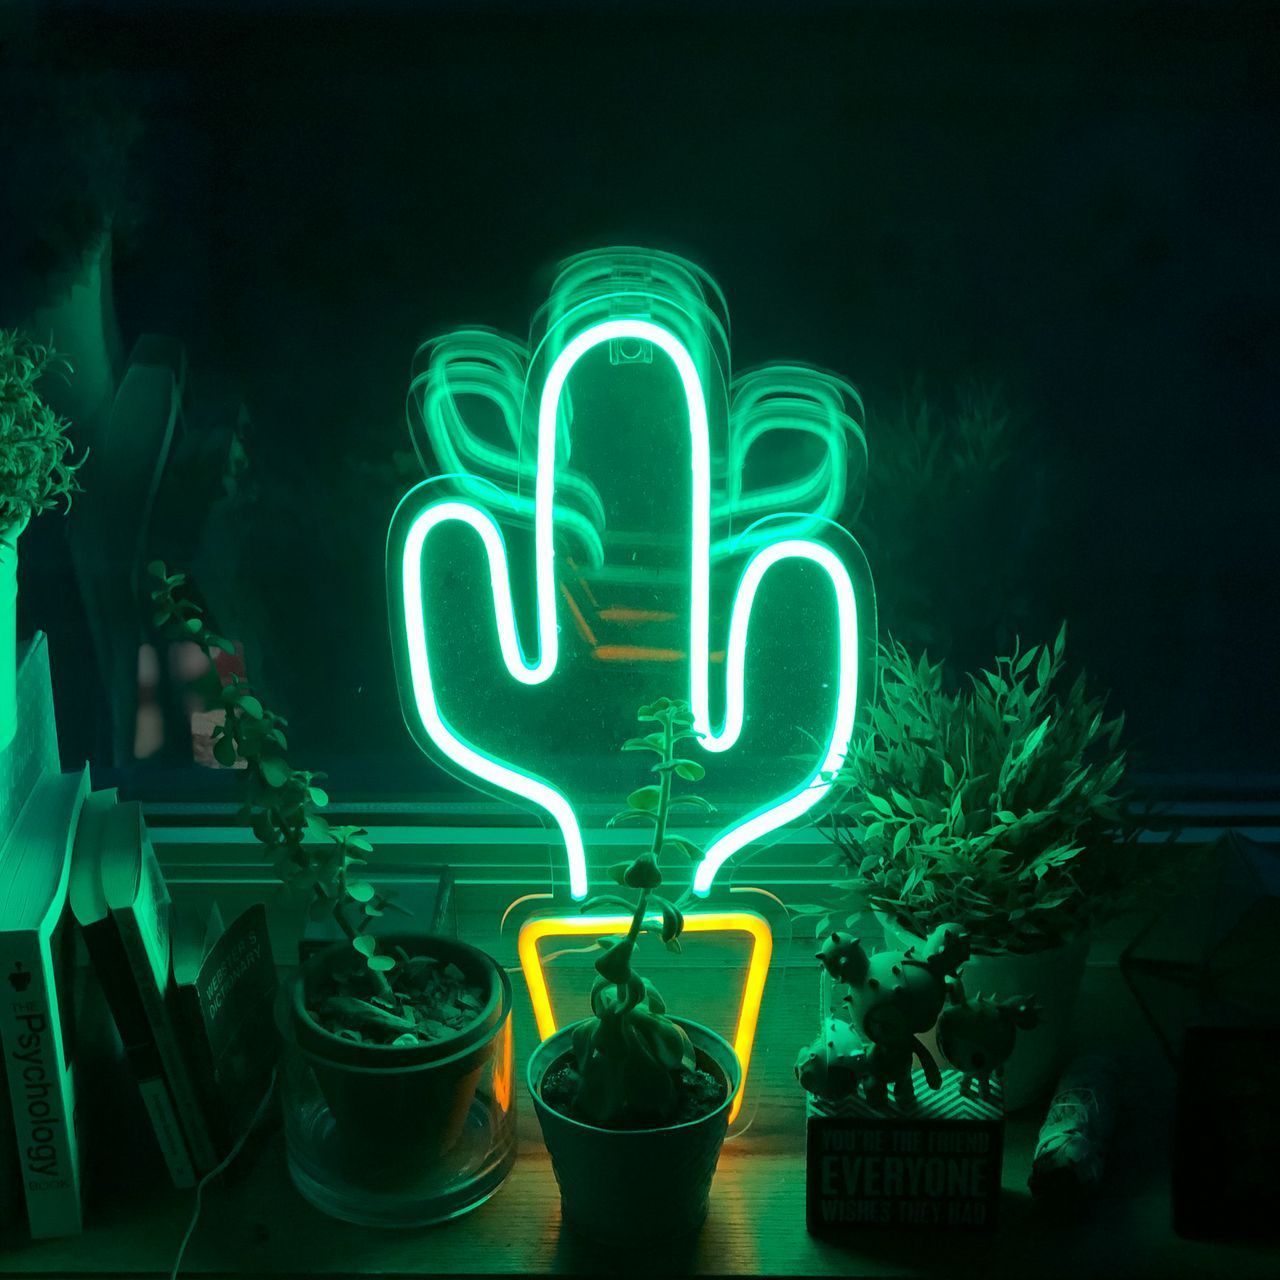 A neon cactus sign in a dark room surrounded by potted plants. - Lime green